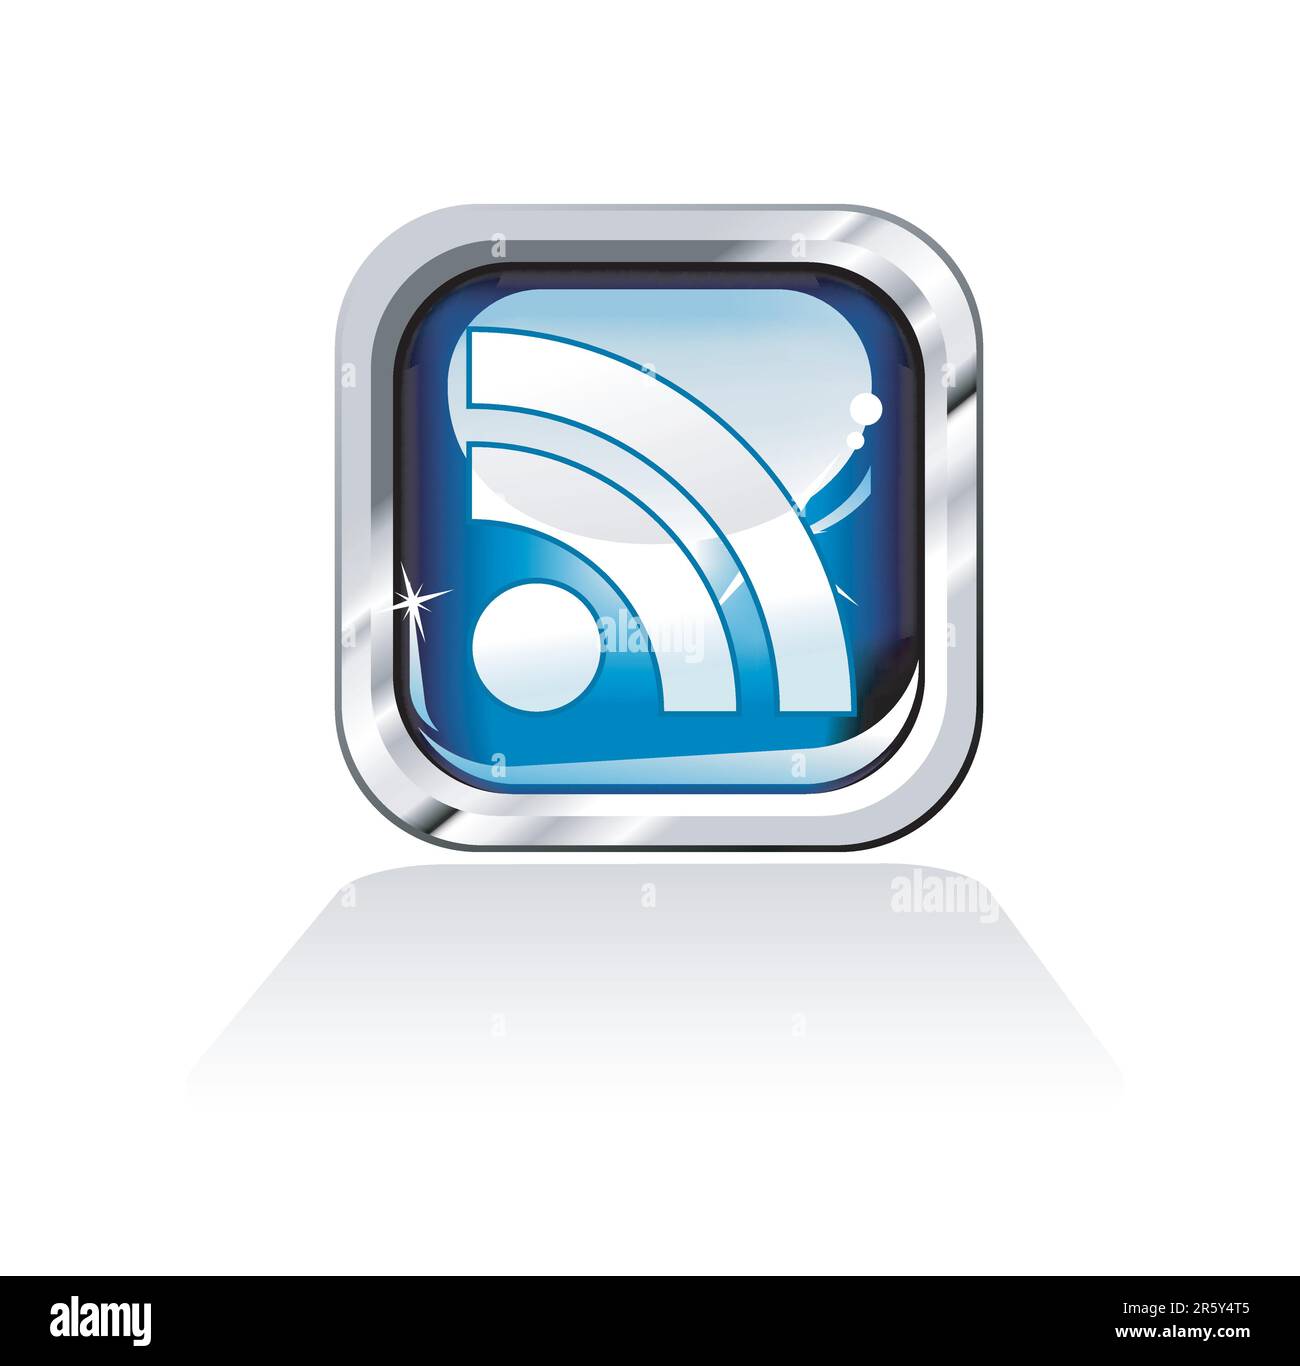 Glossy Blue Rss Feed Icon Stock Vector